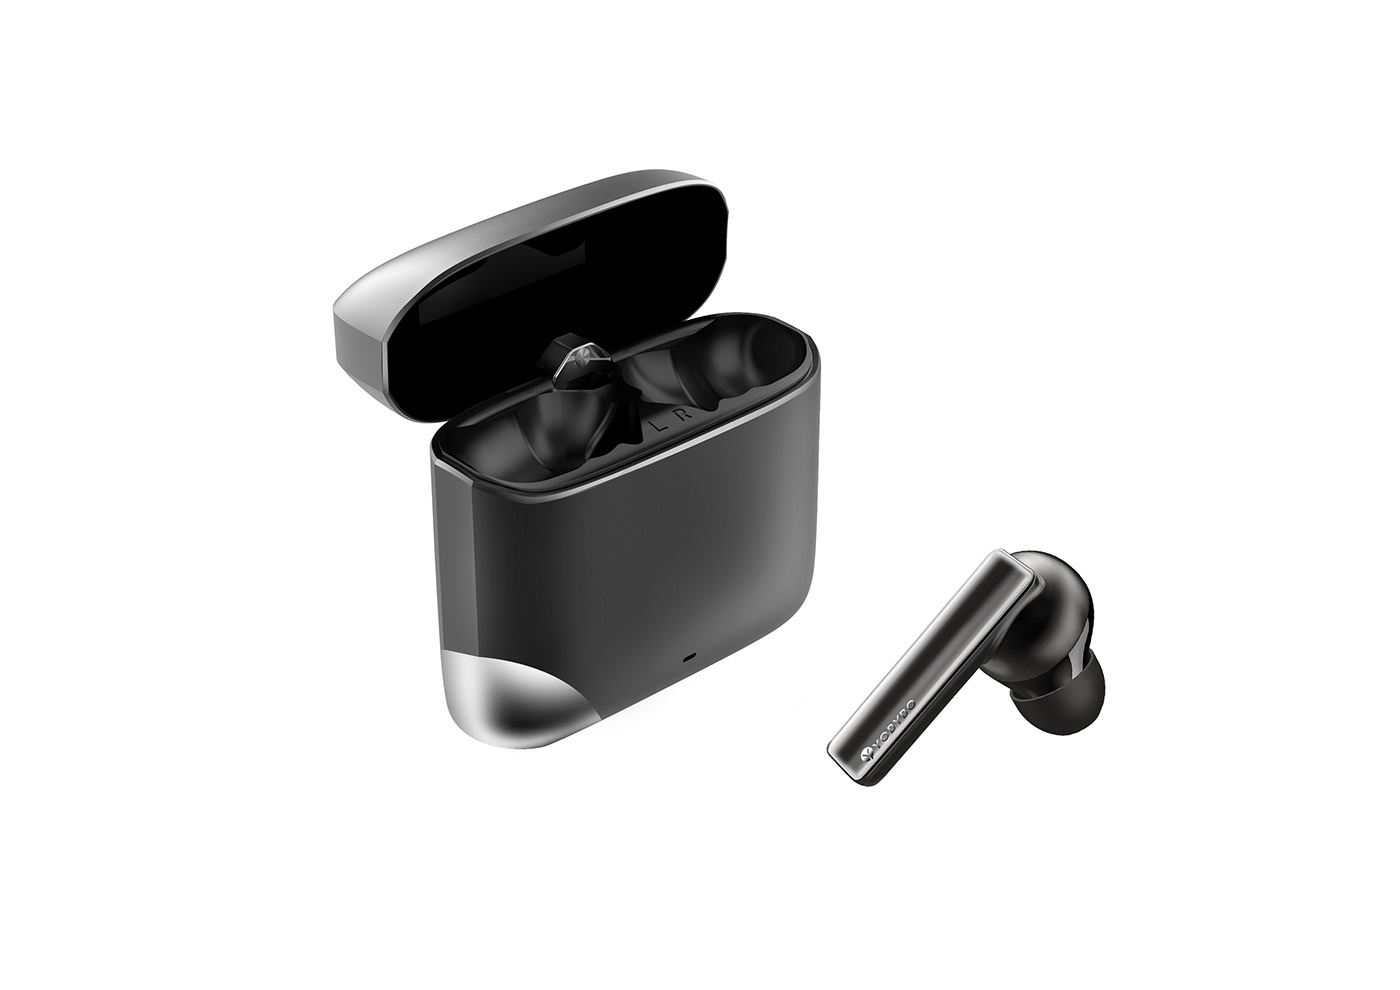 cmf product design  cool earphone glass 3C headset 耳机 Earbuds